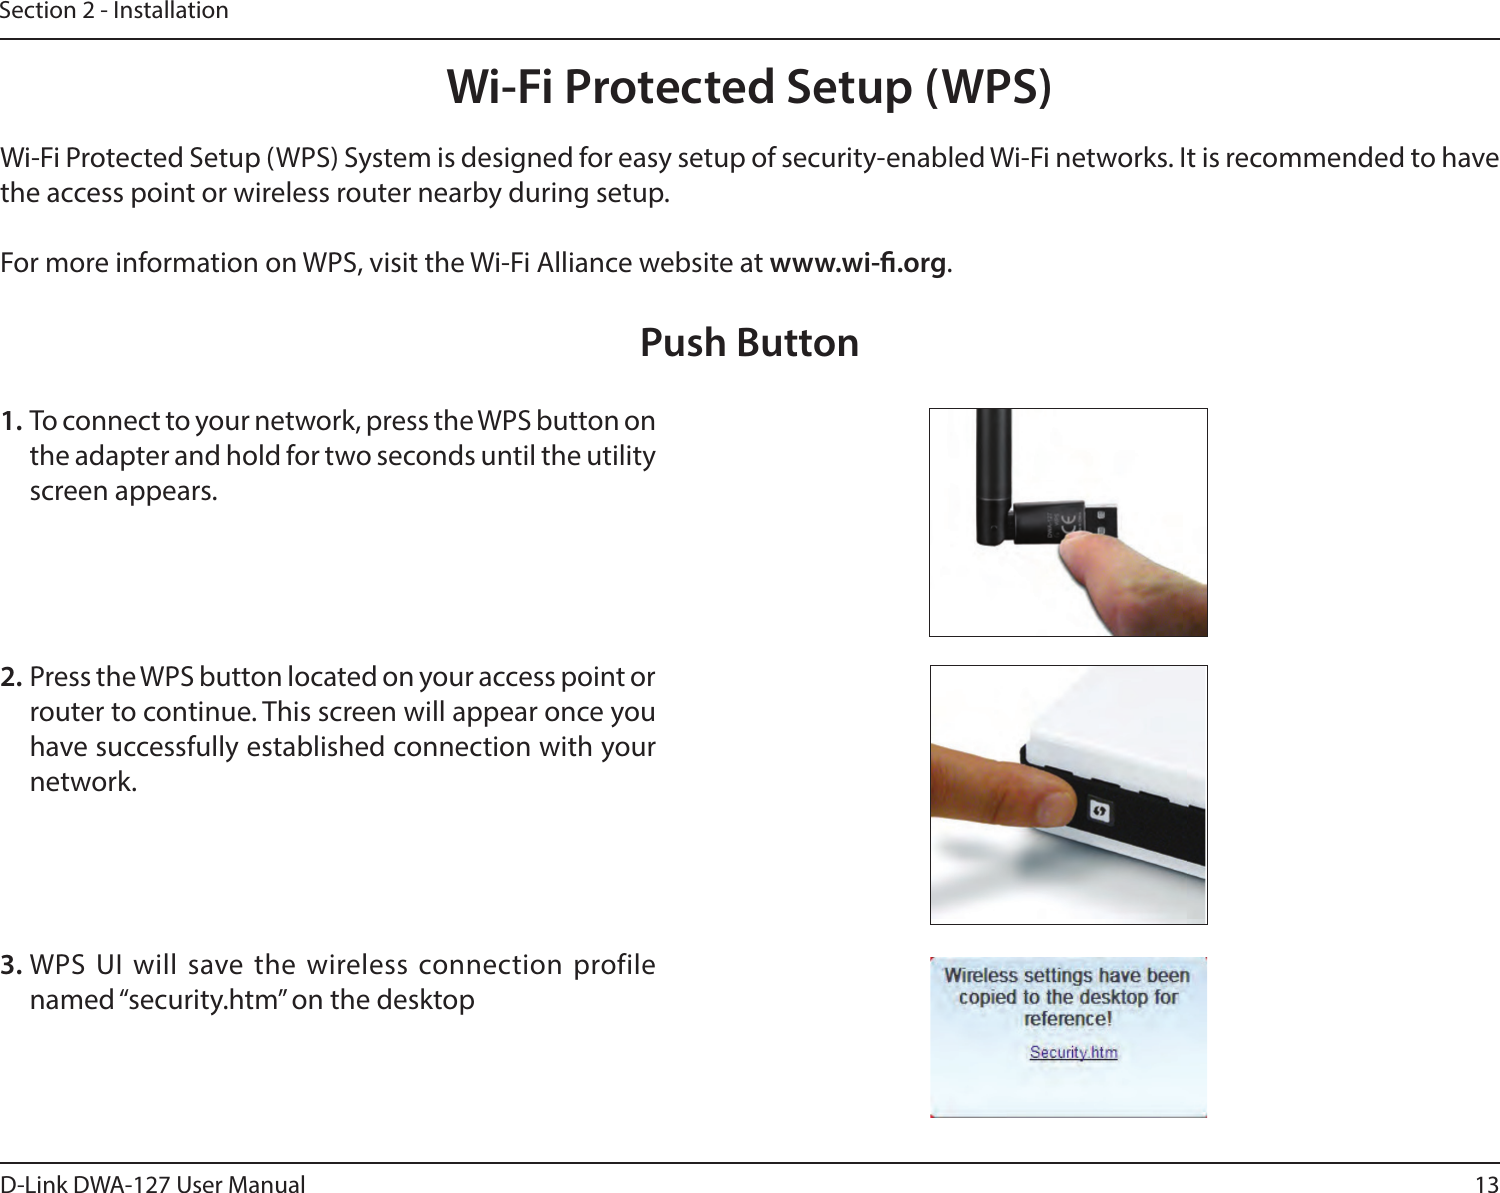 13D-Link DWA-127 User ManualSection 2 - InstallationWi-Fi Protected Setup (WPS)Wi-Fi Protected Setup (WPS) System is designed for easy setup of security-enabled Wi-Fi networks. It is recommended to have the access point or wireless router nearby during setup. For more information on WPS, visit the Wi-Fi Alliance website at www.wi-.org.1. To connect to your network, press the WPS button on the adapter and hold for two seconds until the utility screen appears.2. Press the WPS button located on your access point or router to continue. This screen will appear once you have successfully established connection with your network. Push Button3. WPS UI will save the wireless connection profile named “security.htm” on the desktop